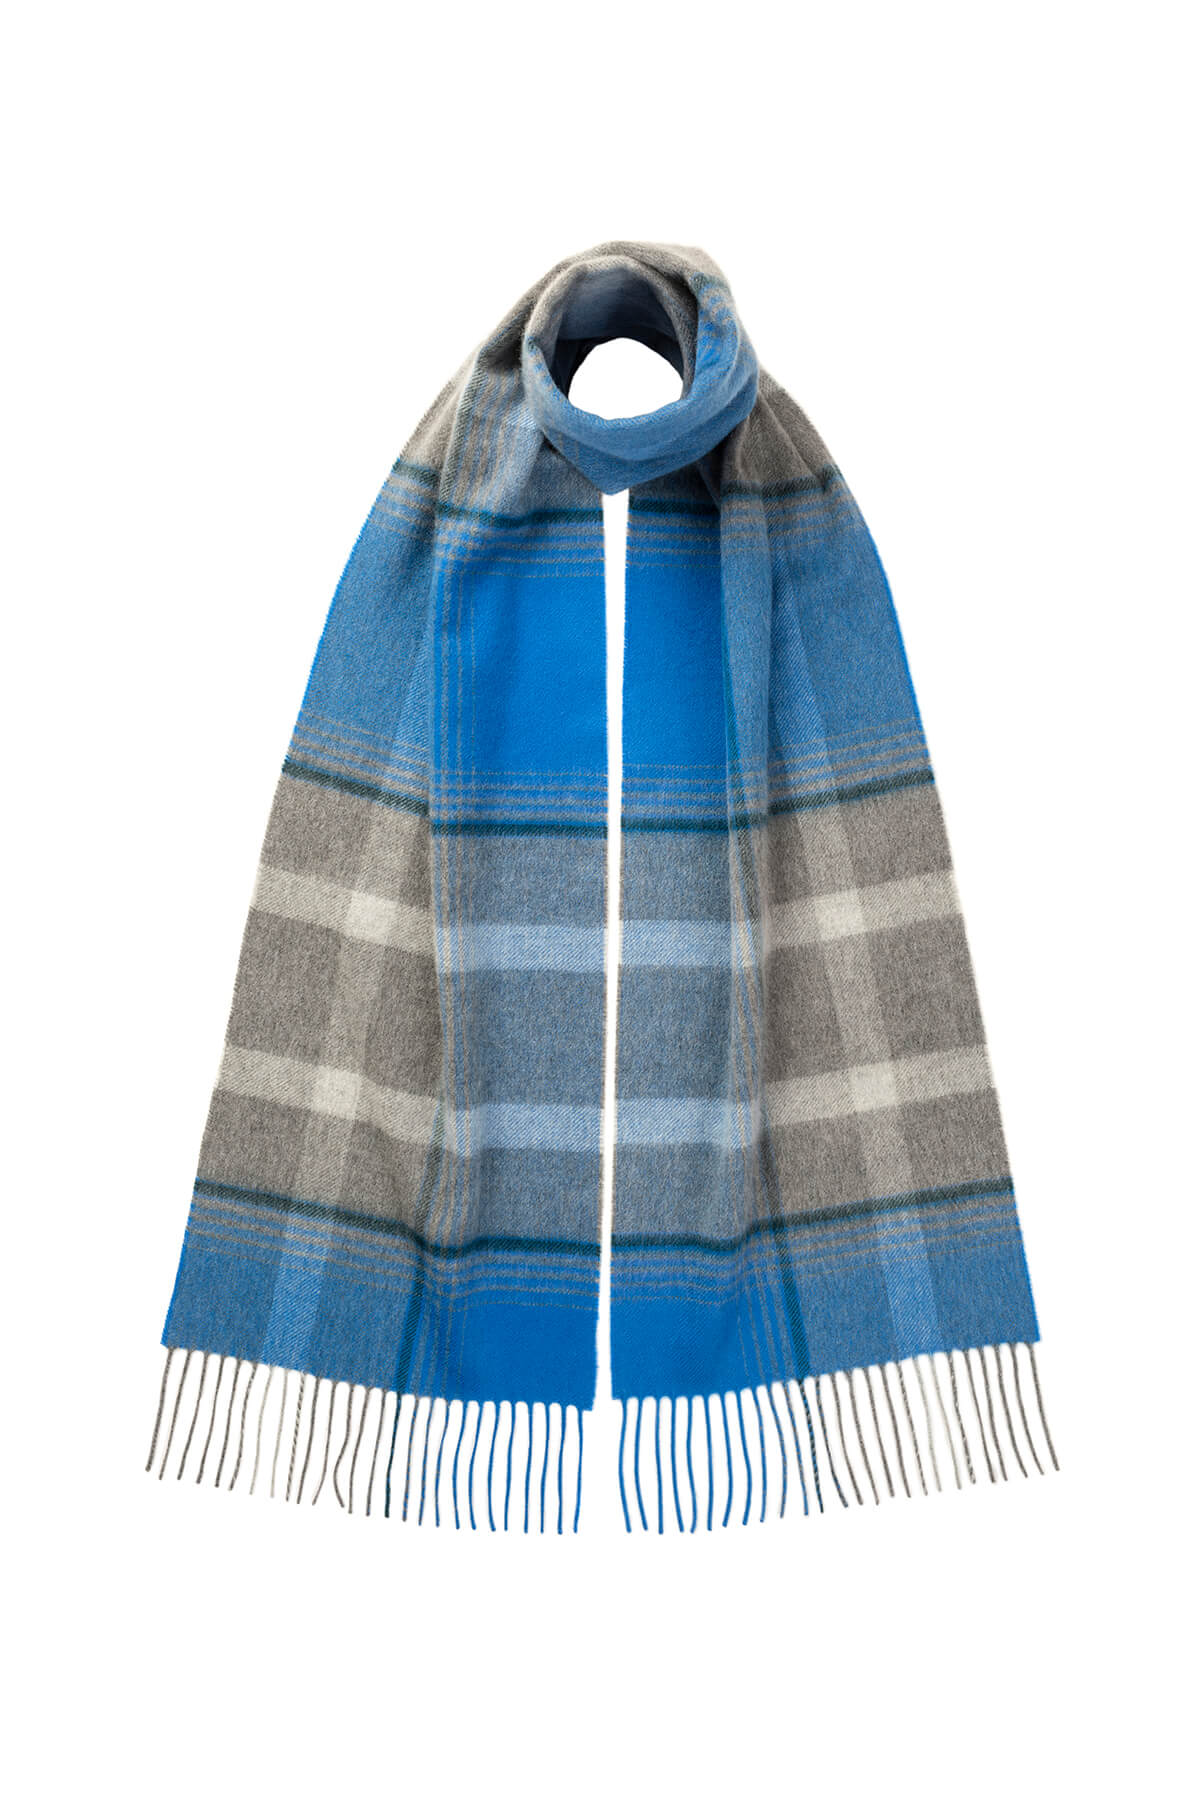 Johnstons of Elgin Asymmetric Check Cashmere Scarf in Blue on a white background WA000016RU7318ONE